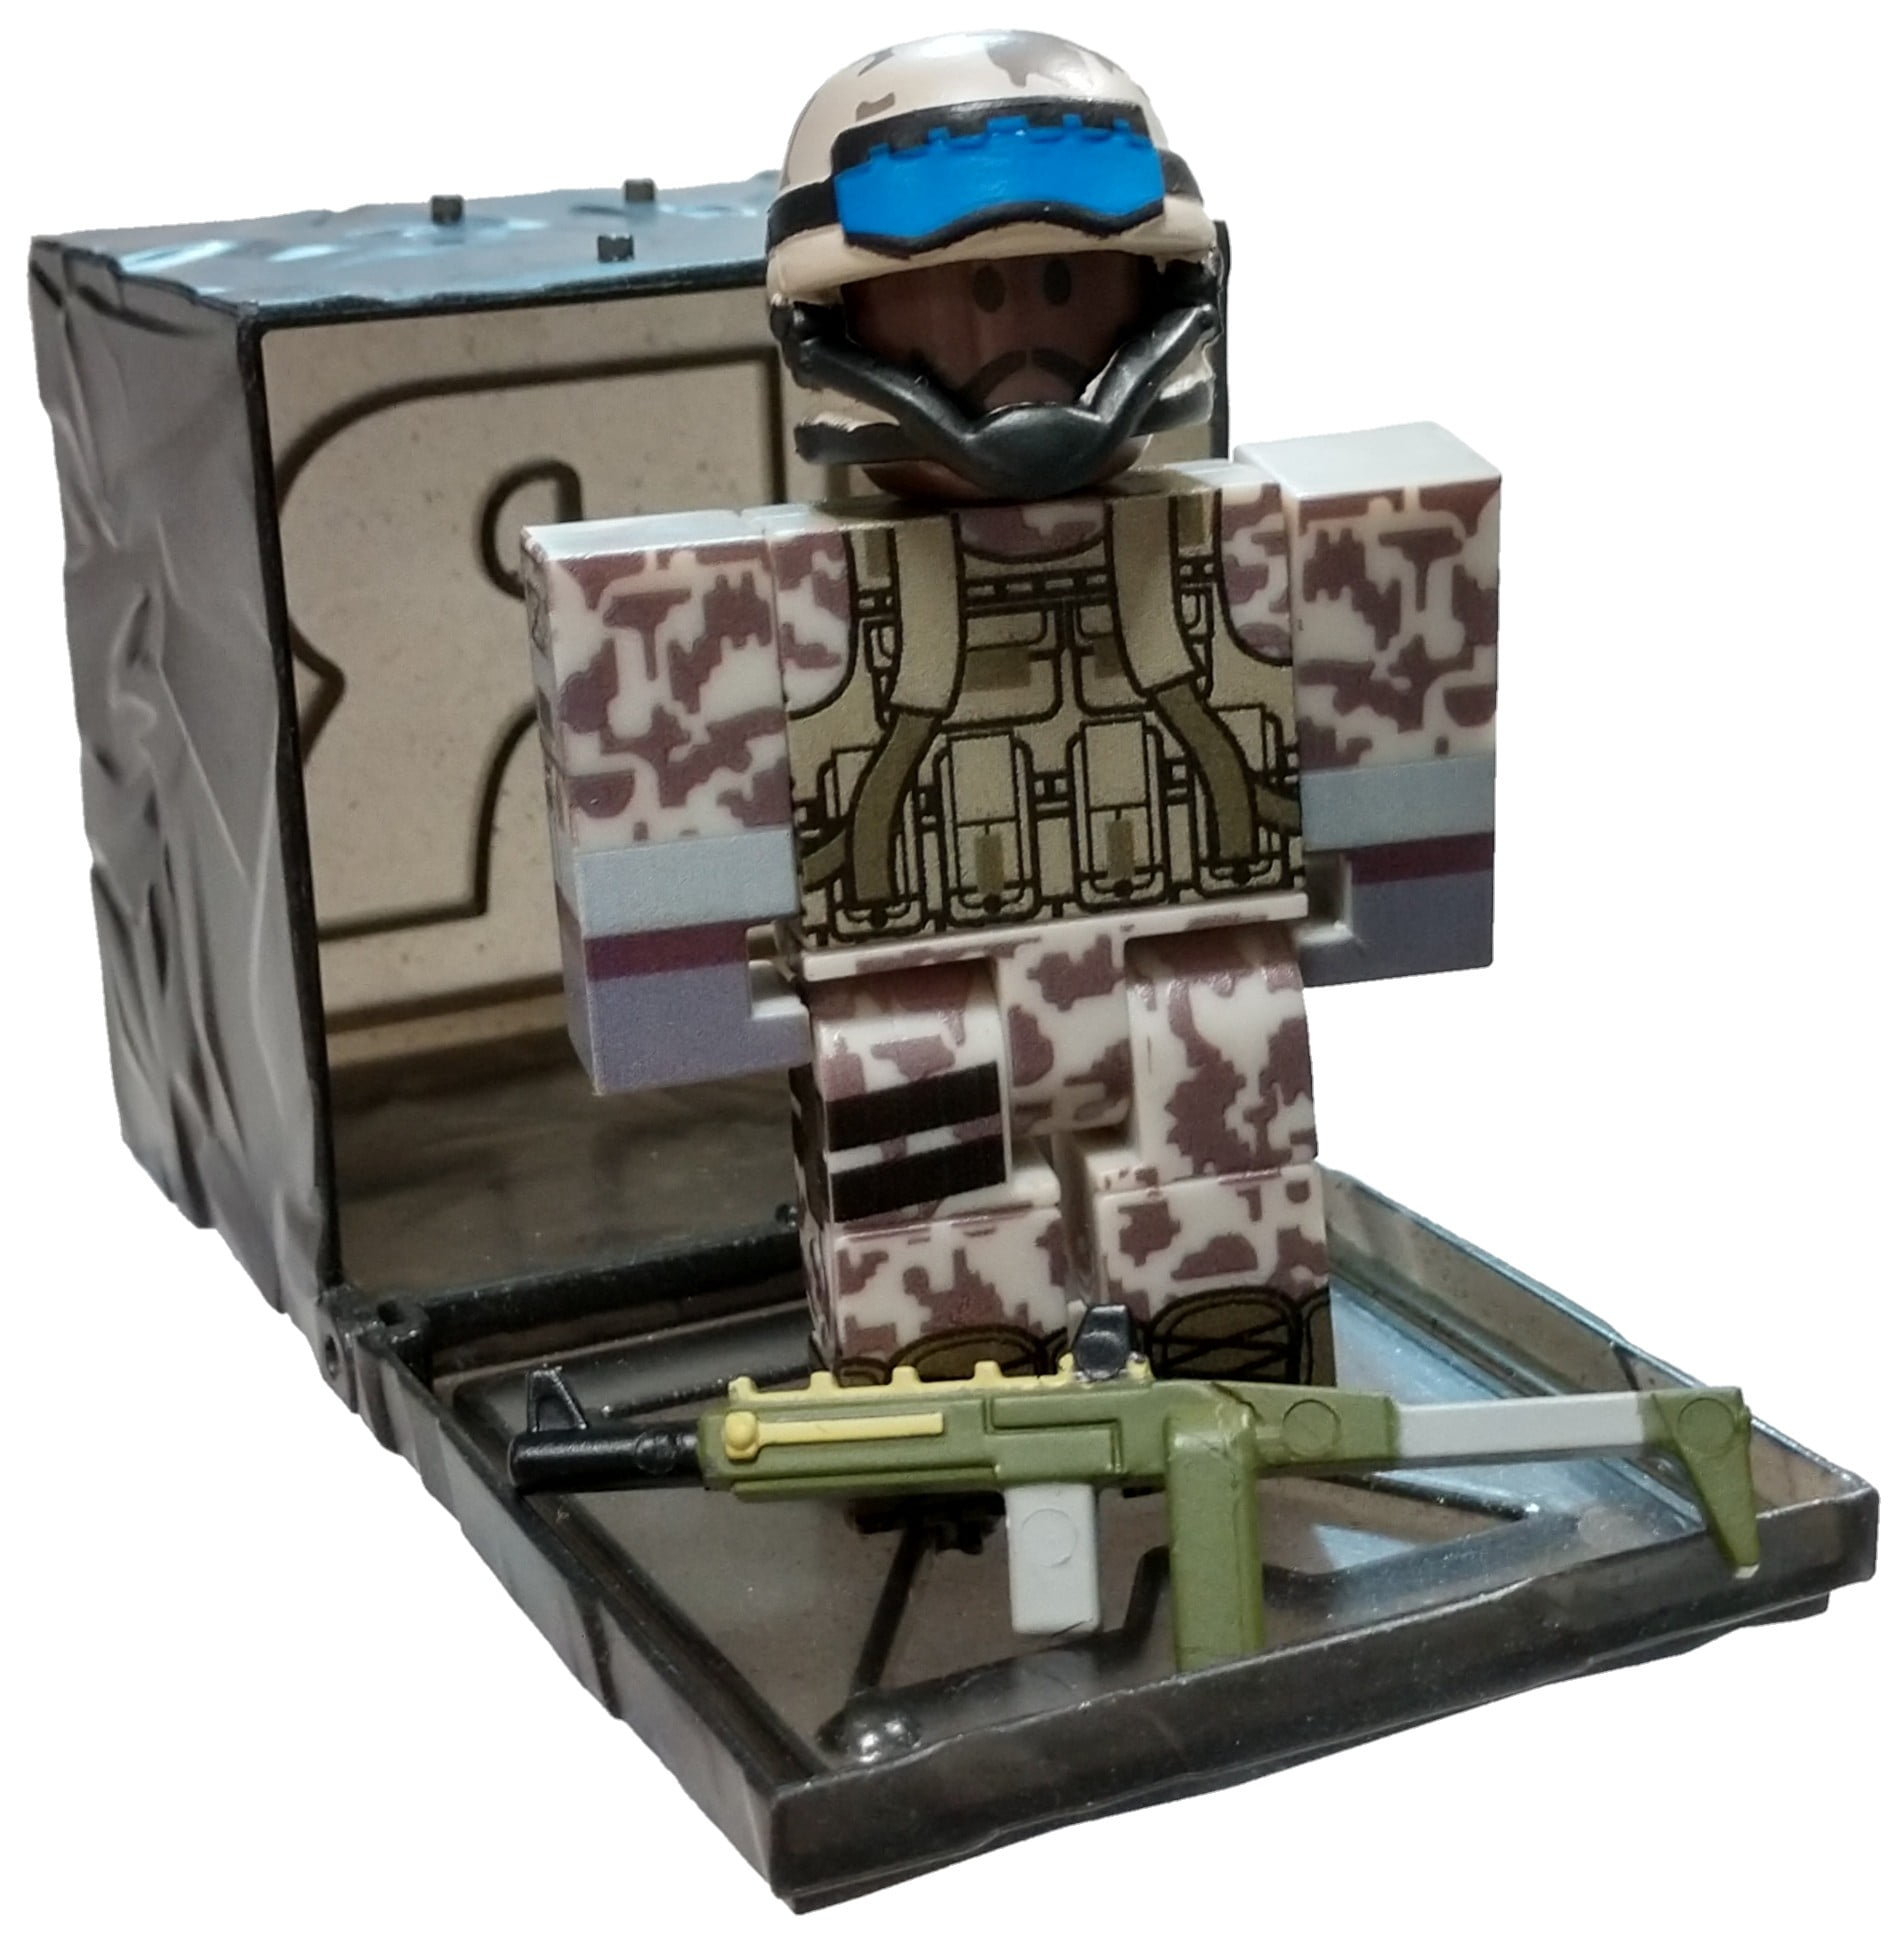 Roblox Series 7 After The Flash Uscpf Soldier Mini Figure With Black Cube And Online Code No Packaging Walmart Com Walmart Com - roblox soldier